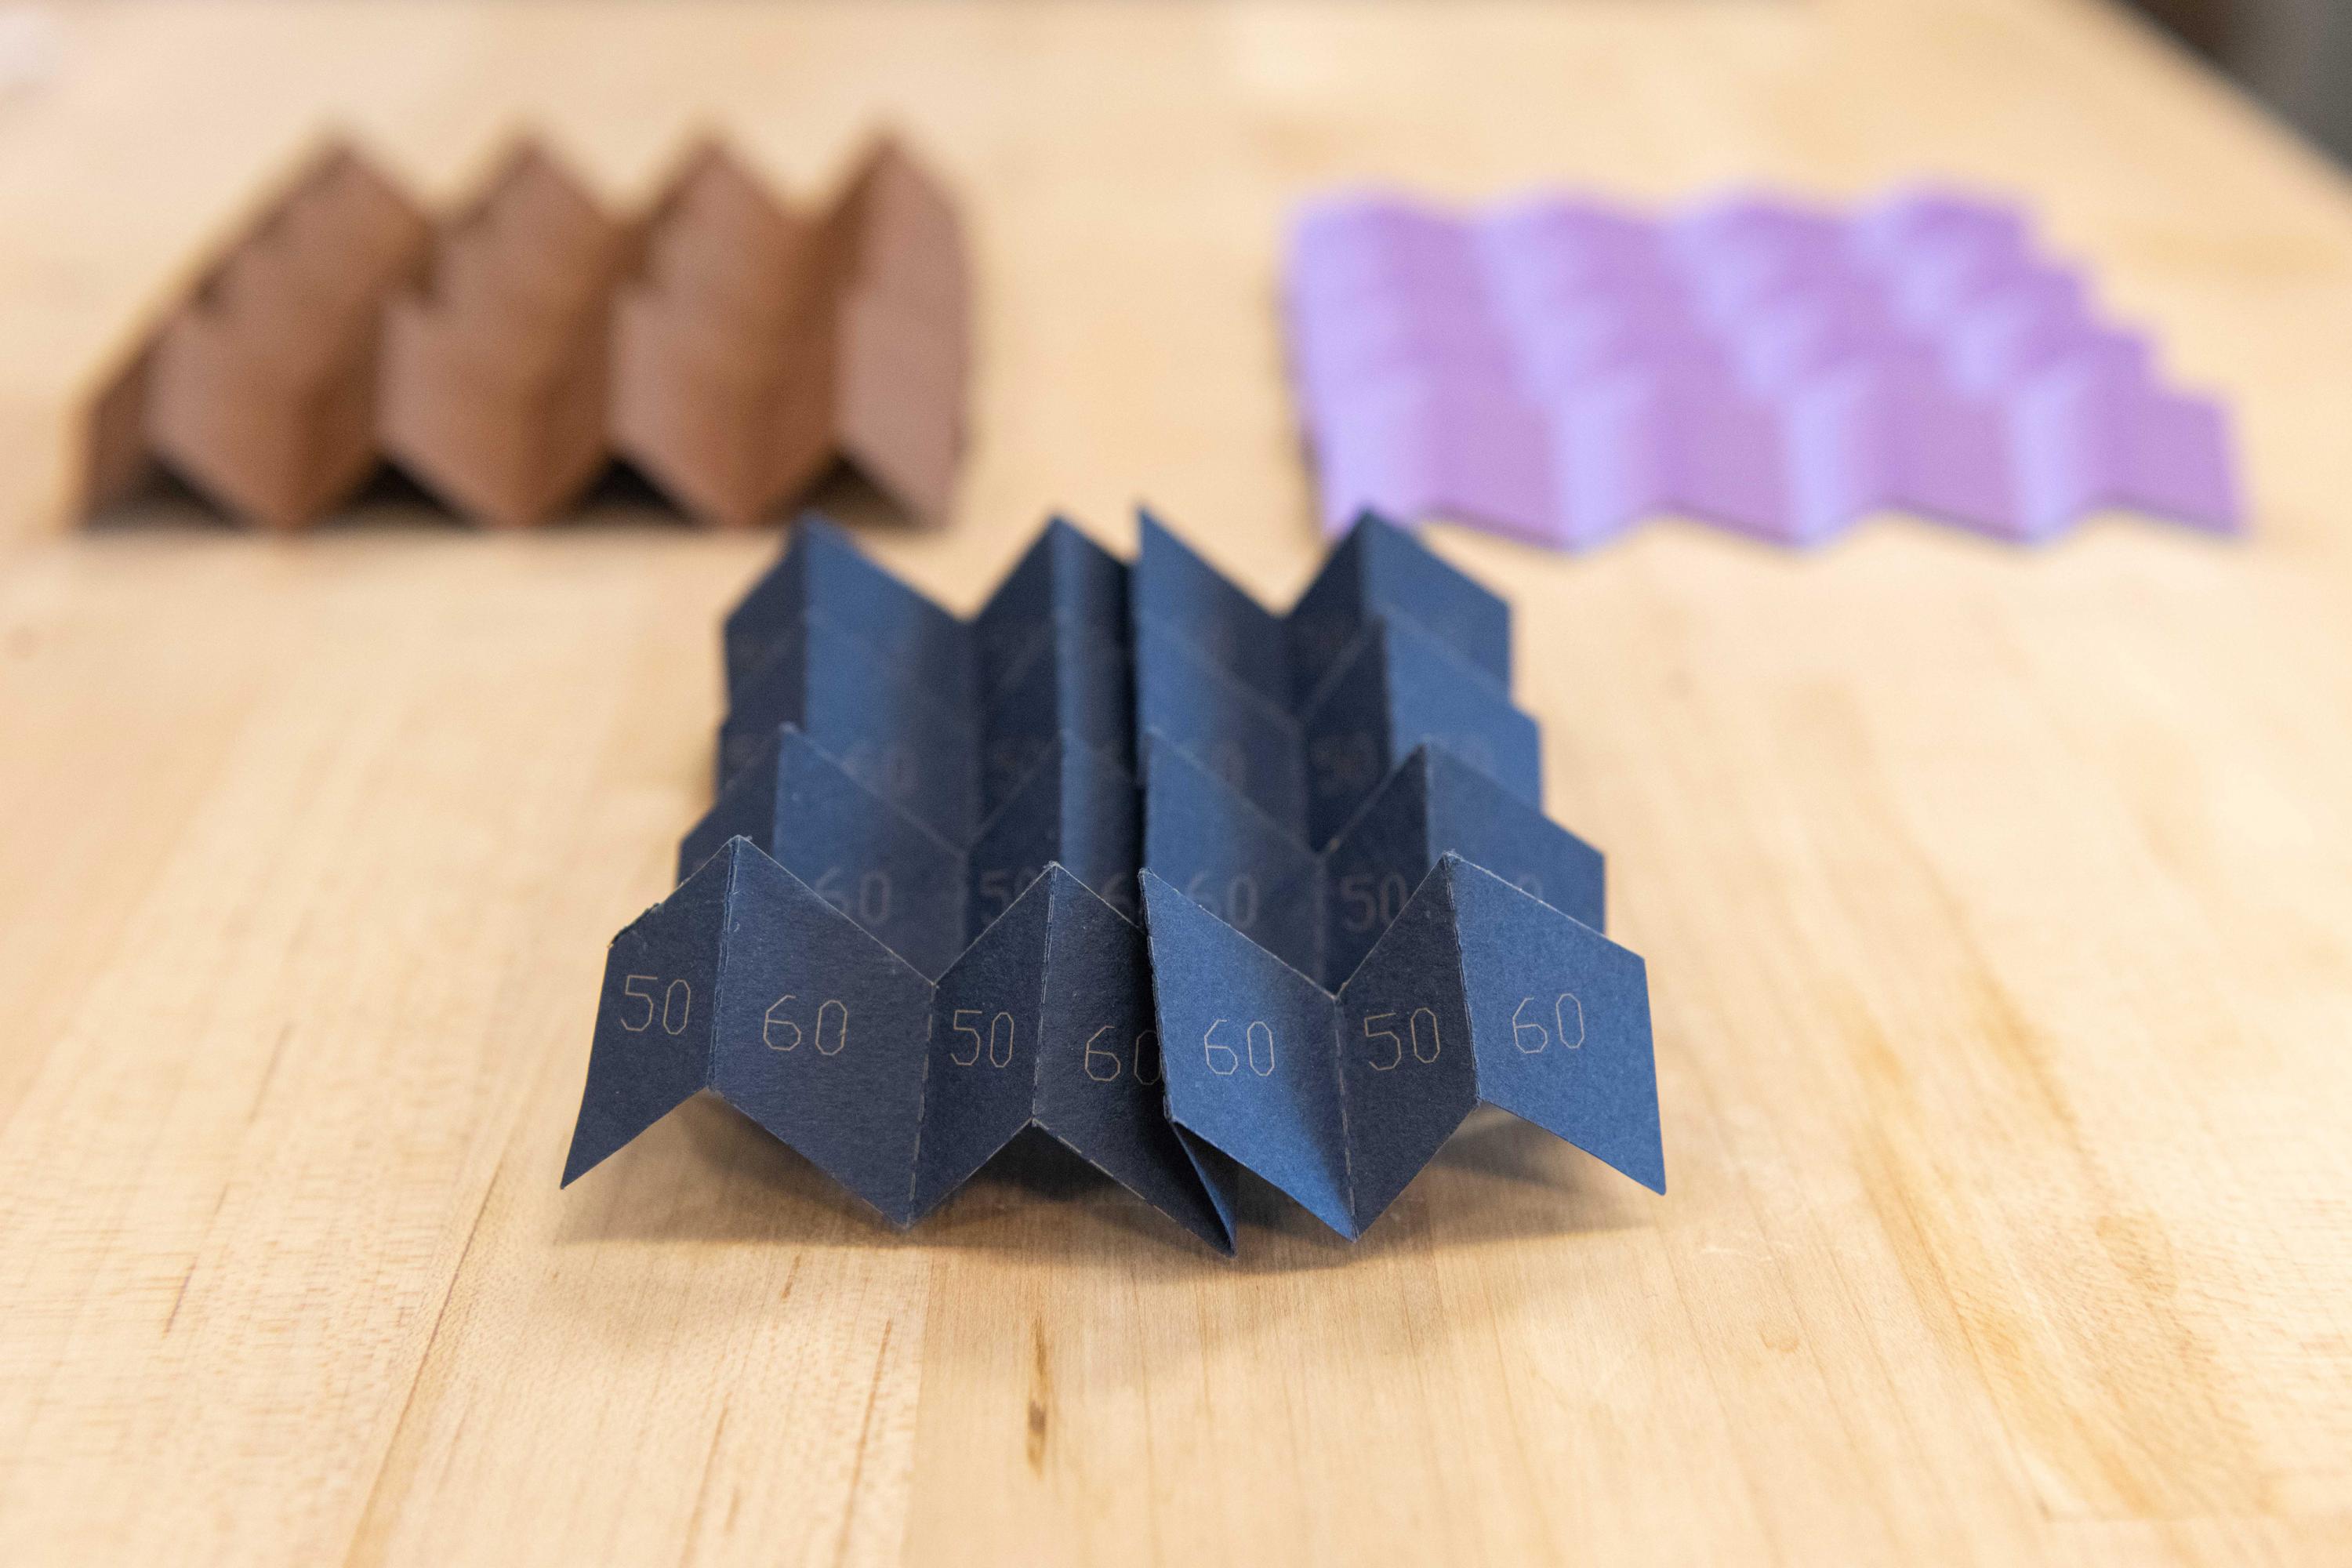 A new type of origami can morph from one pattern into a different one, or even a hybrid of two patterns, instantly altering many of its structural characteristics. (Credit: Allison Carter)